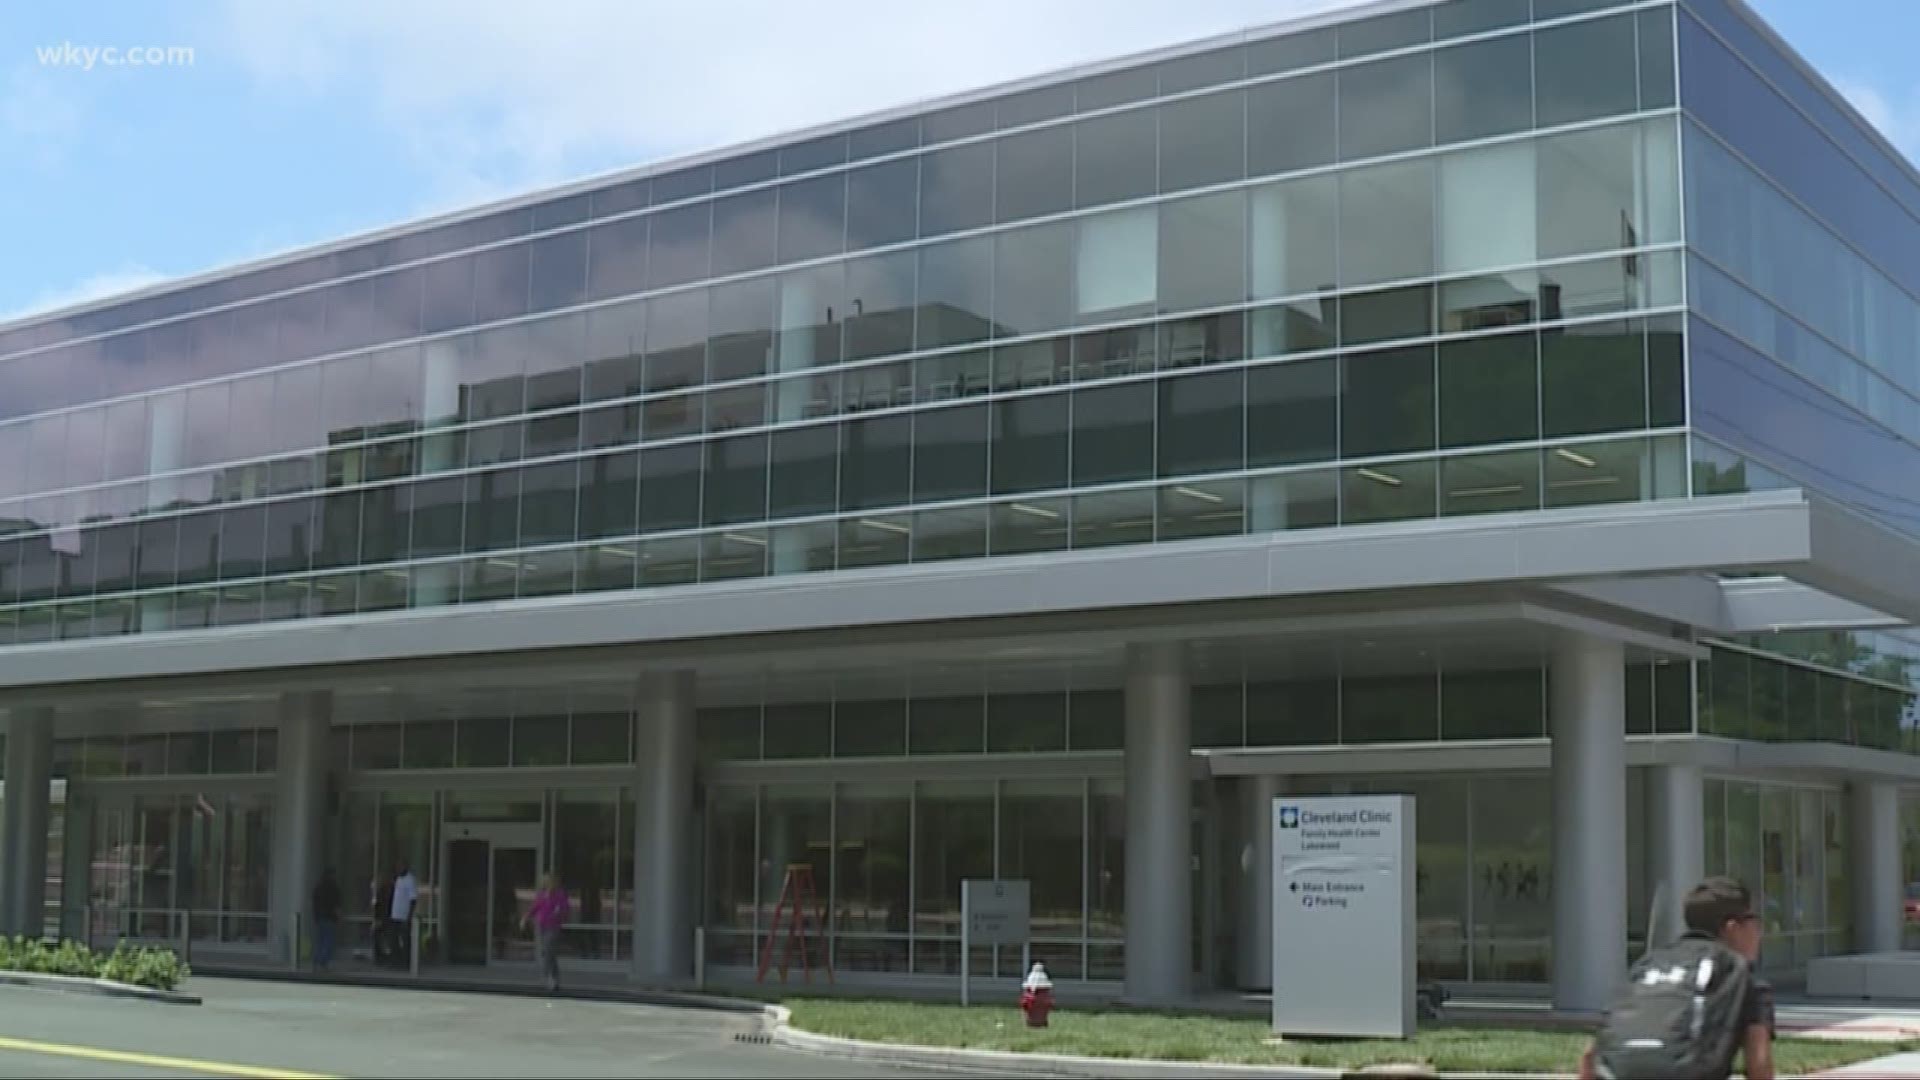 Lakewood Cleveland Clinic to open this weekend